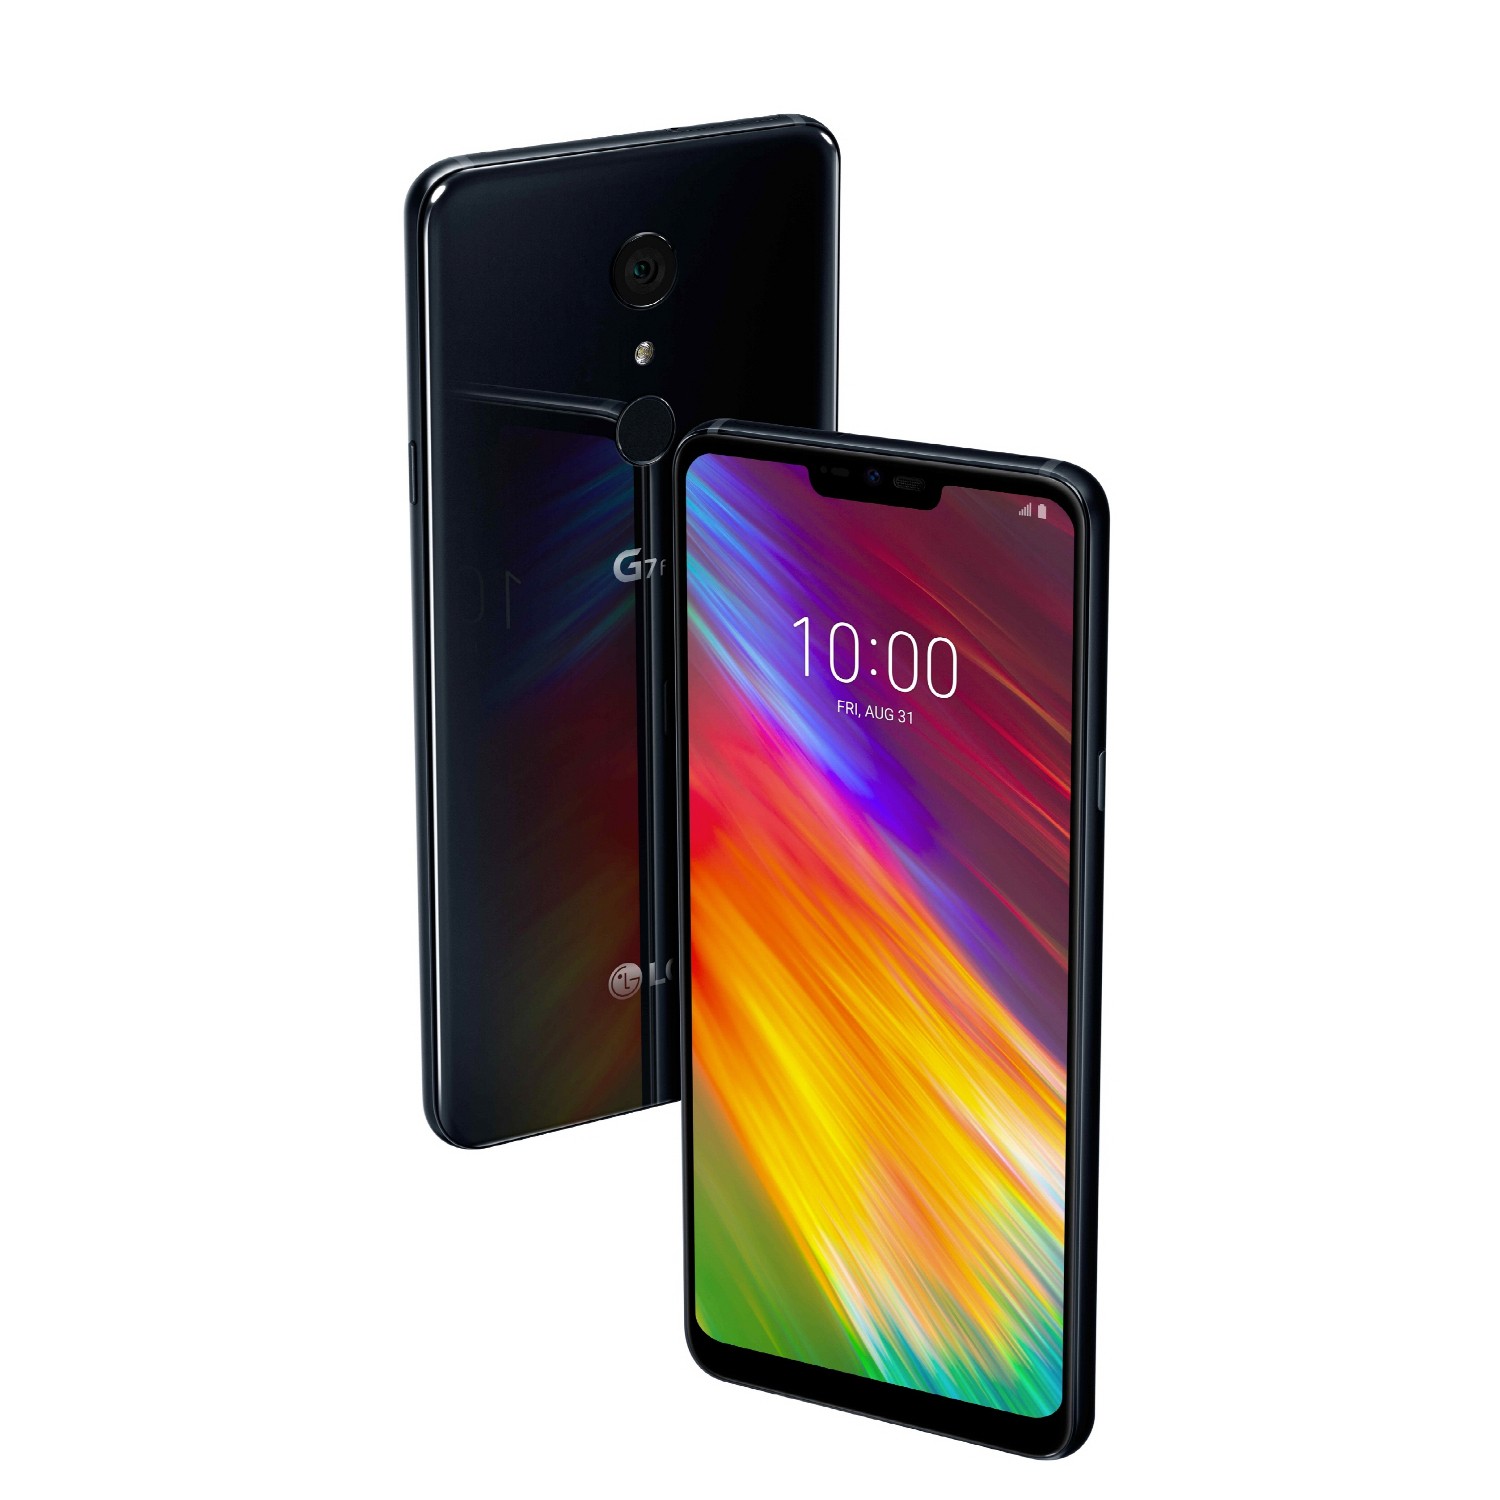 The front and rear view of the LG G7 Fit in New Aurora Black